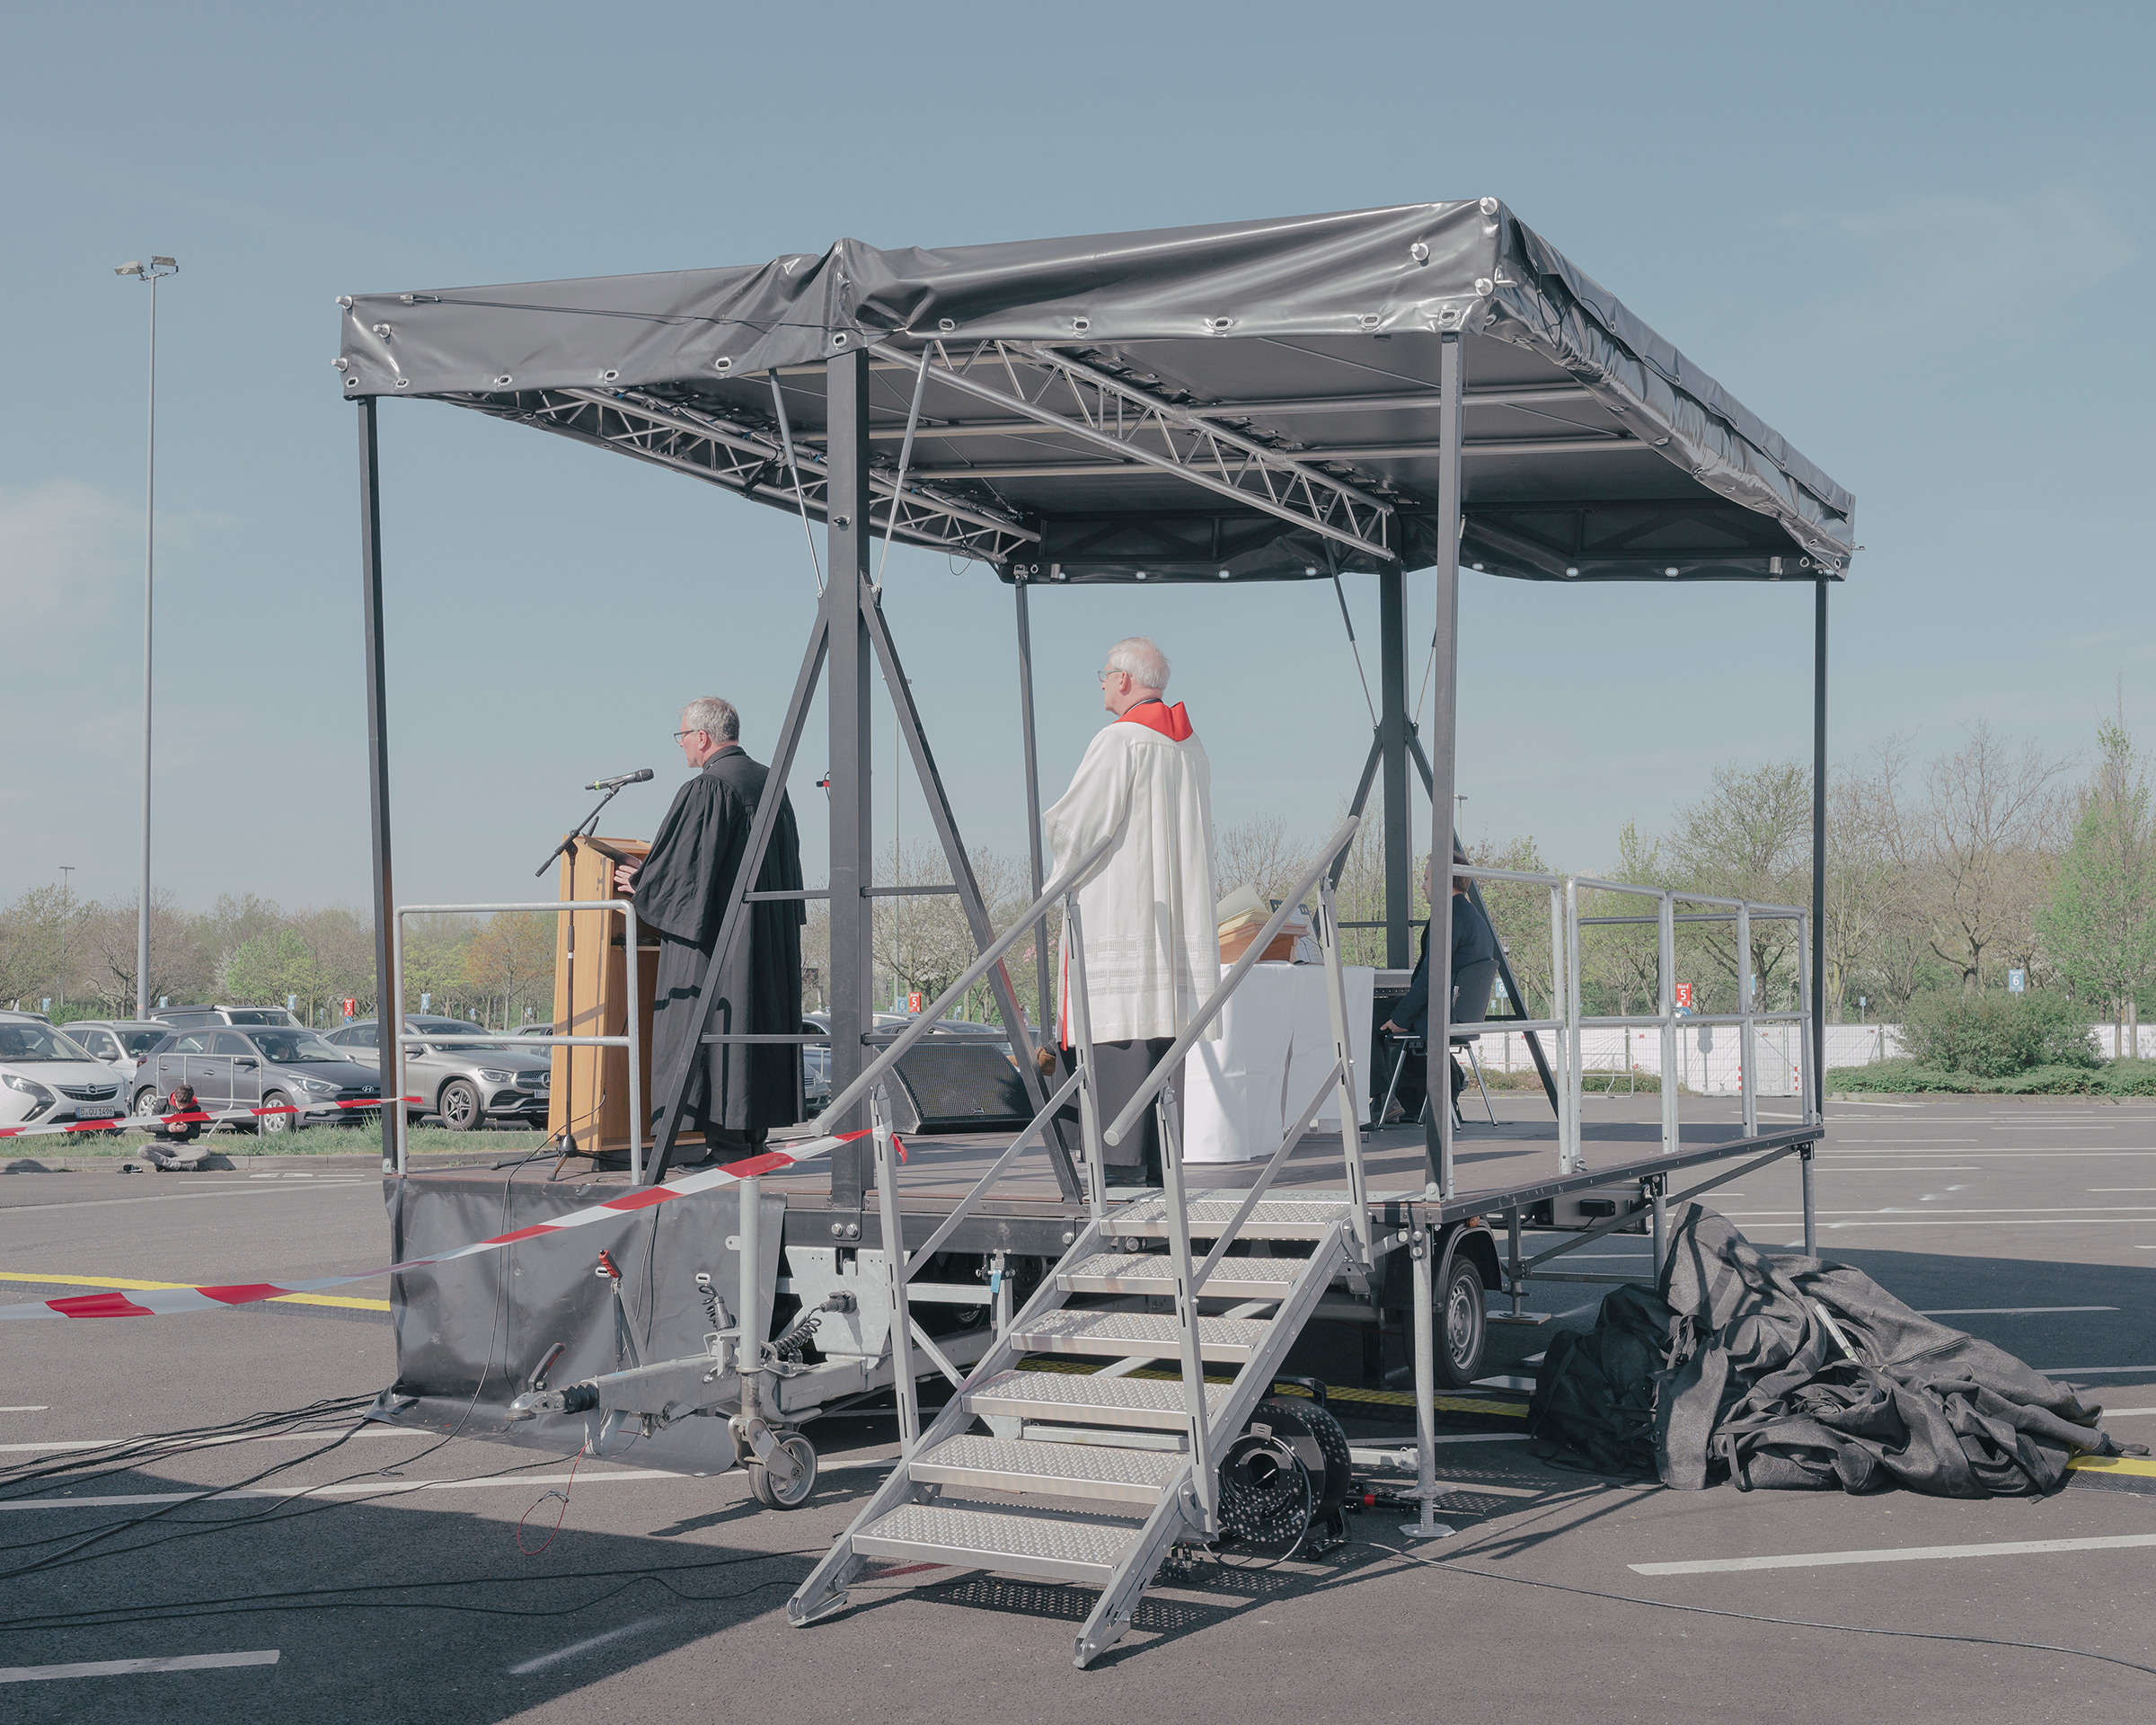 Easter services are held at a drive-in cinema in Düsseldorf on April 10, as church services have been prohibited throughout Germany since March 16. (Ingmar Björn Nolting—DOCKS Collective)